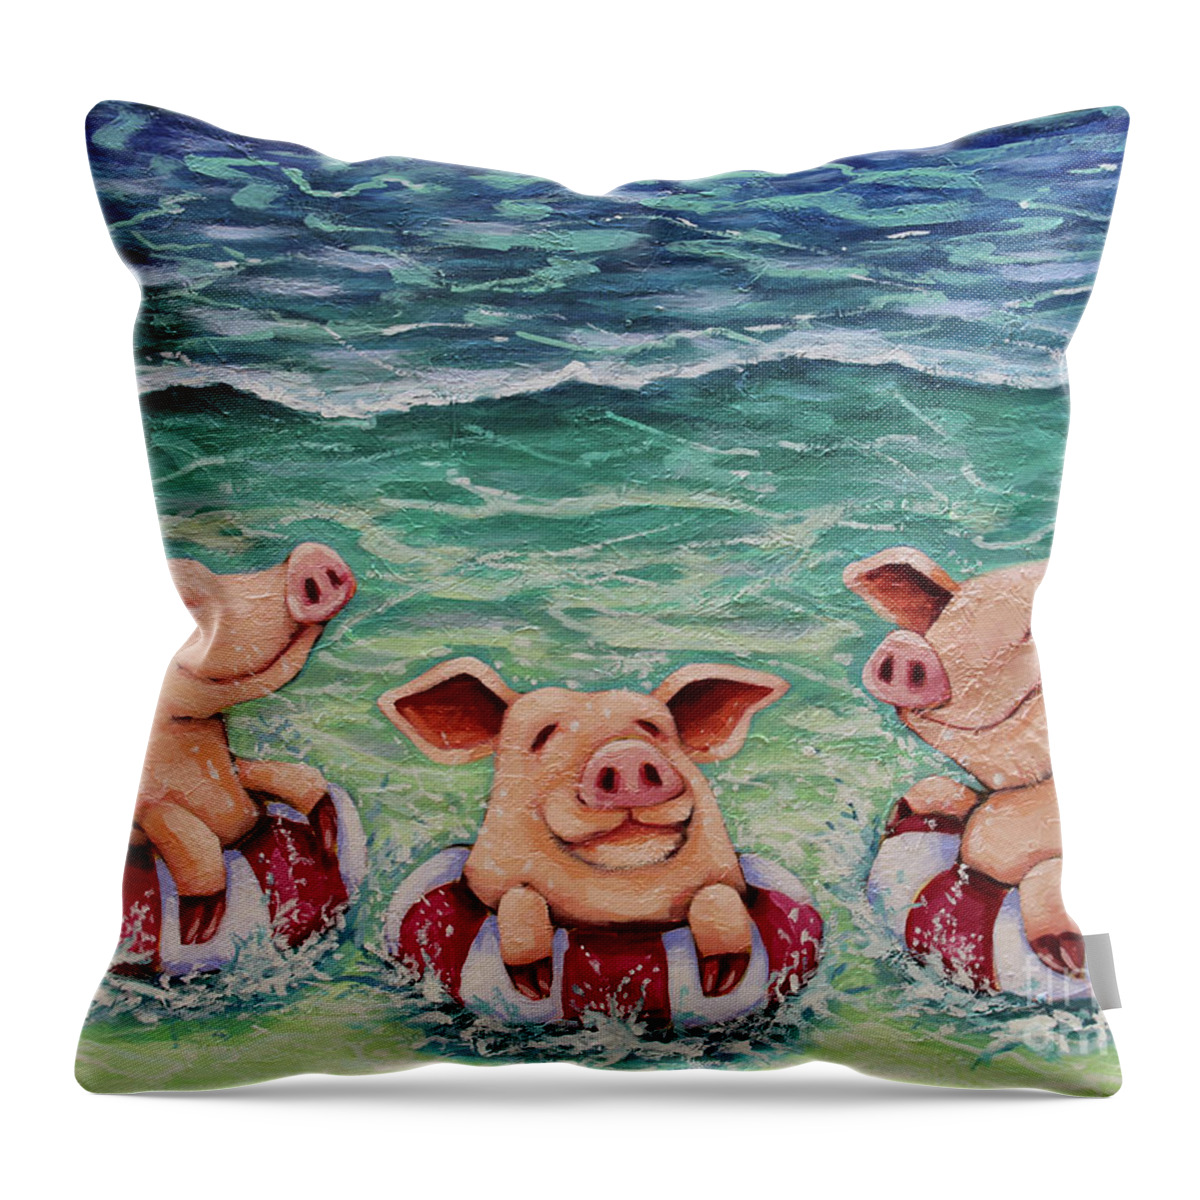 Pig Throw Pillow featuring the painting Three Swimming Pigs by Lucia Stewart